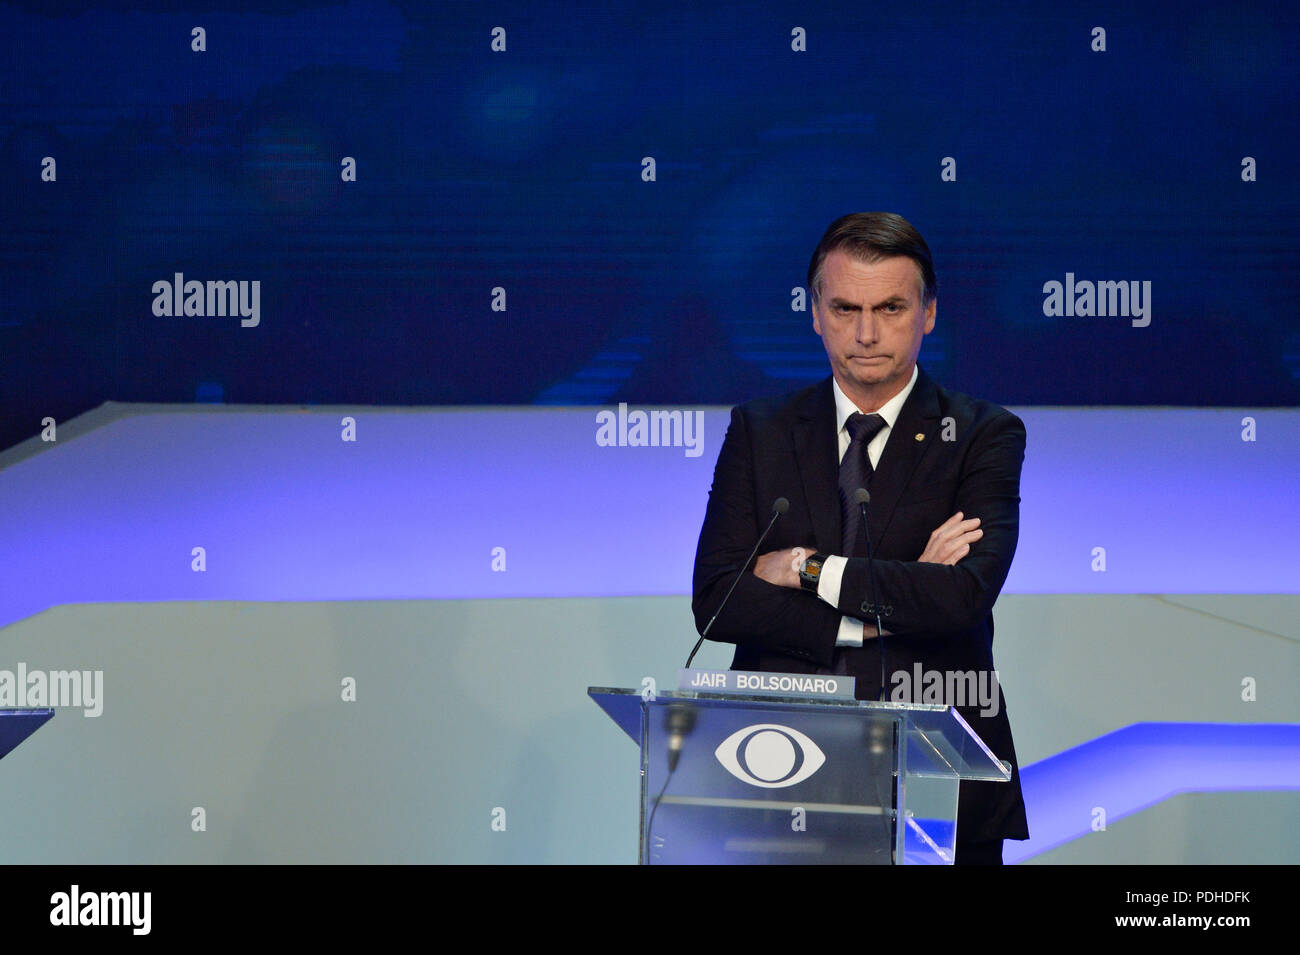 Sao Paulo, Brazil, on August 9, 2018. Brazilian presidential candidate Jair Bolsonaro (PSL), speaks during the first presidential debate ahead of the October 7 general election, at Bandeirantes television network in Sao Paulo, Brazil, on August 9, 2018.  (PHOTO: LEVI BIANCO/BRAZIL PHOTO PRESS) Stock Photo